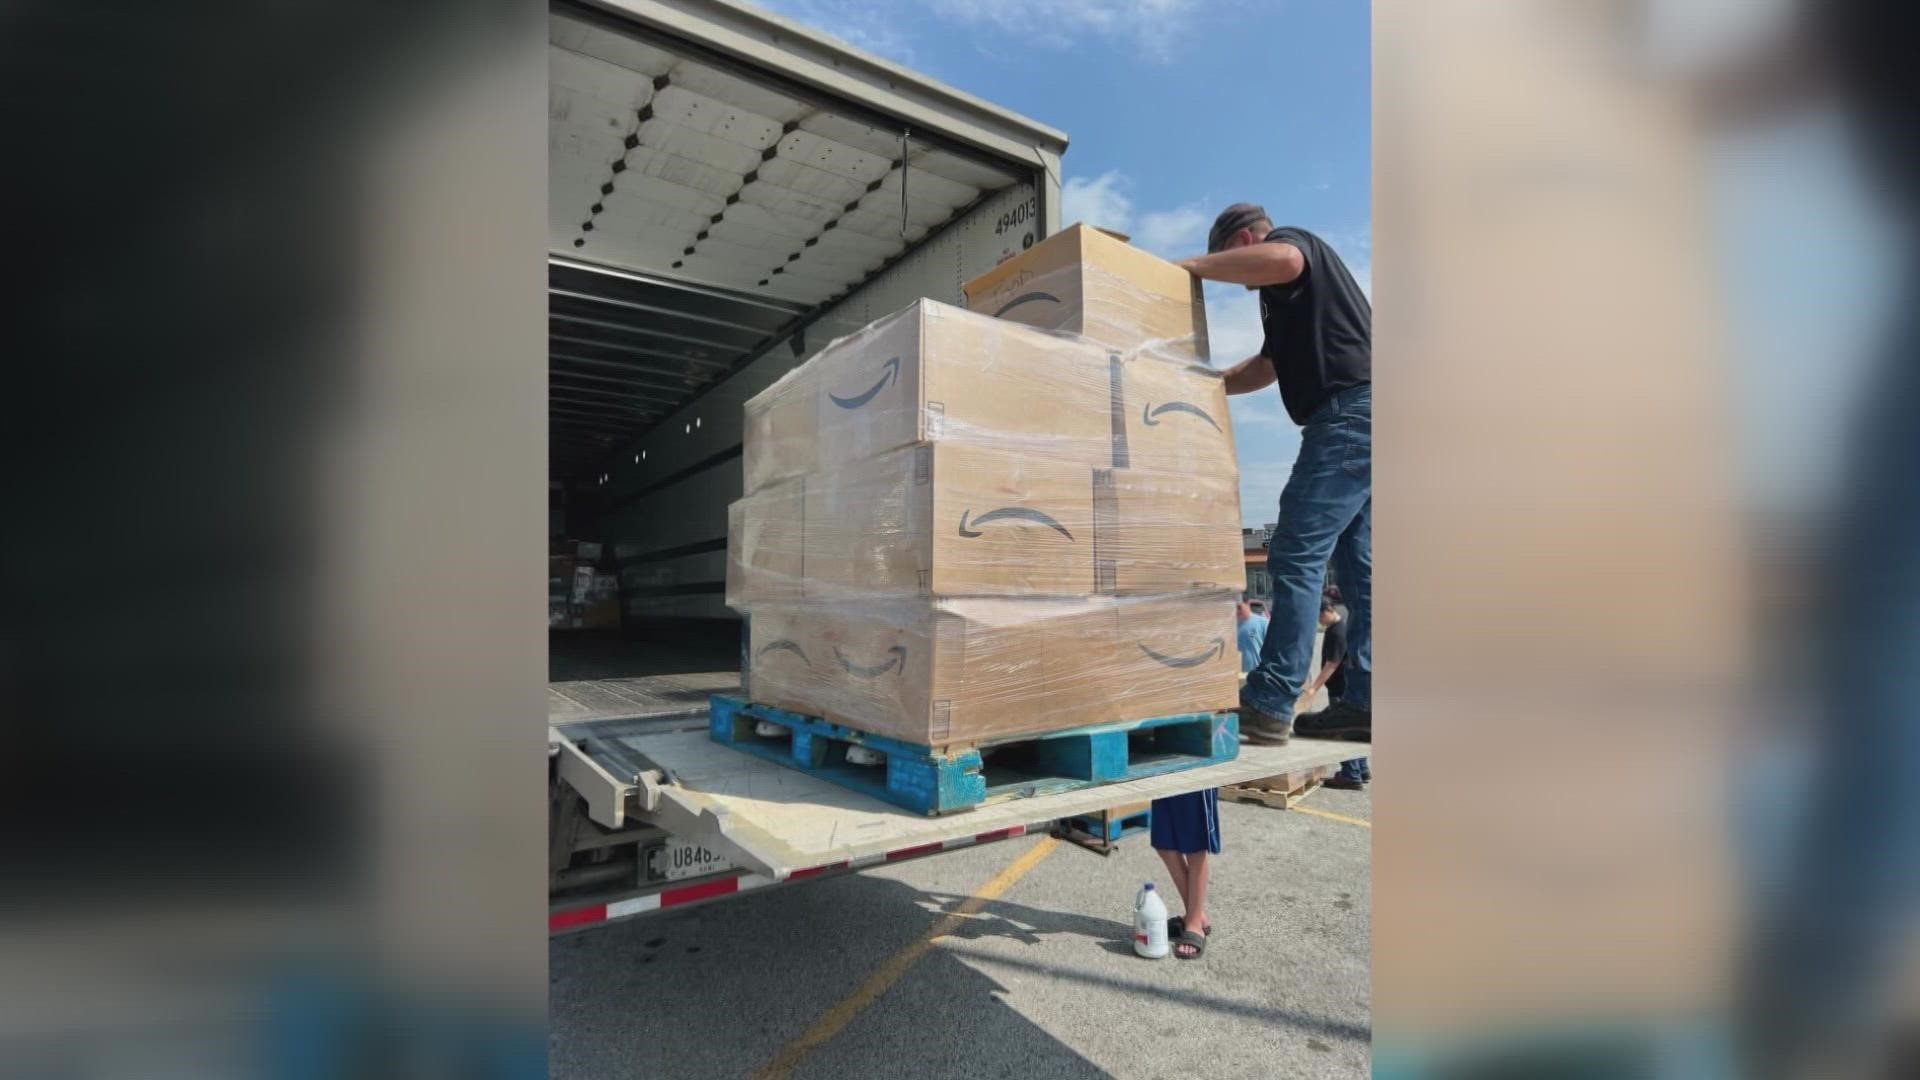 Volunteers from the sheriff's office and the high school football team collected more than 30,000 pounds of donated supplies for eastern Kentucky.